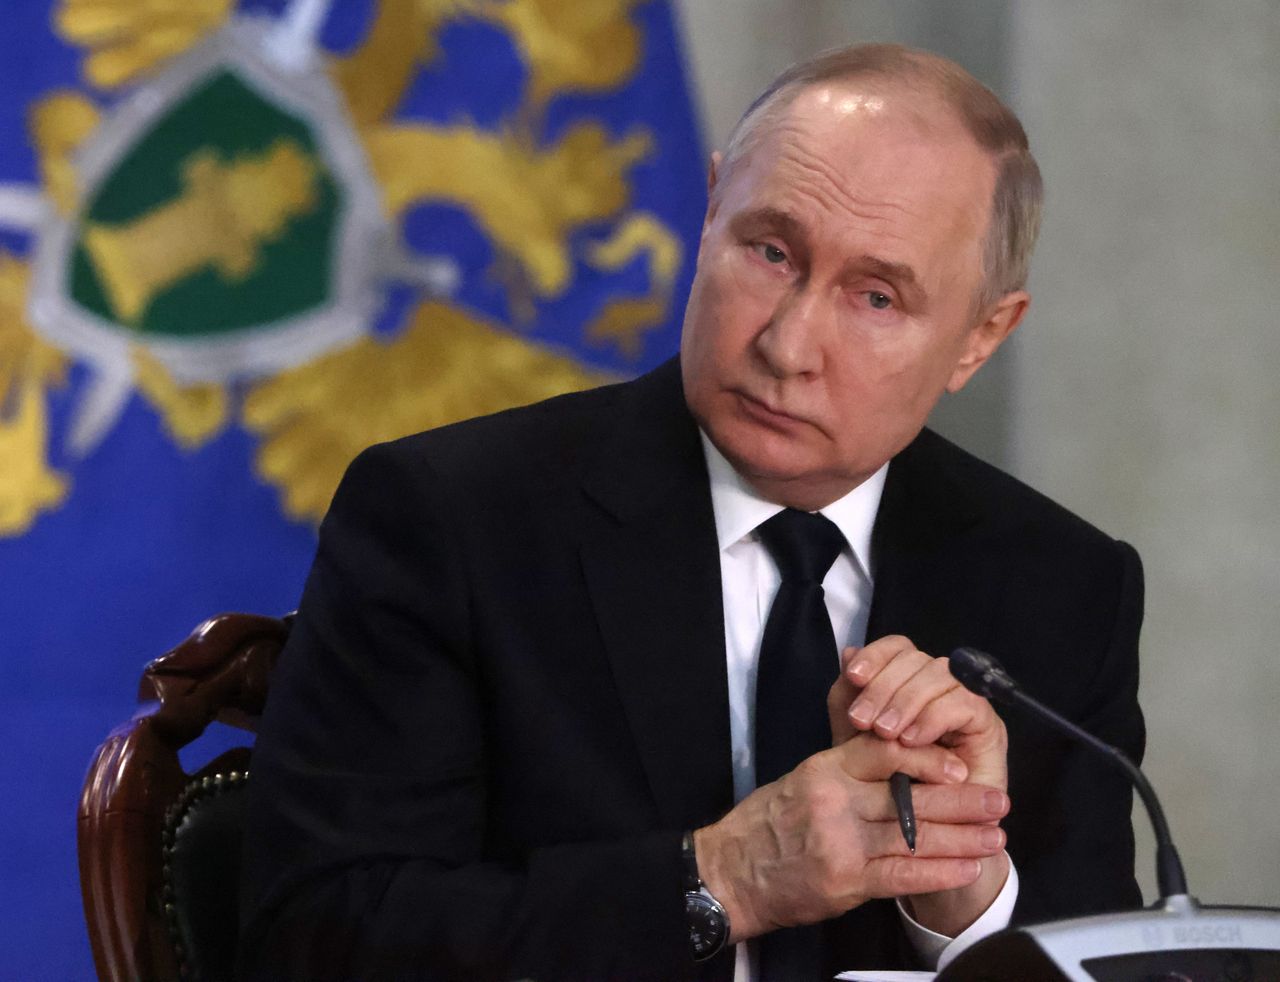 Putin may launch an attack on additional countries, including Moldova.